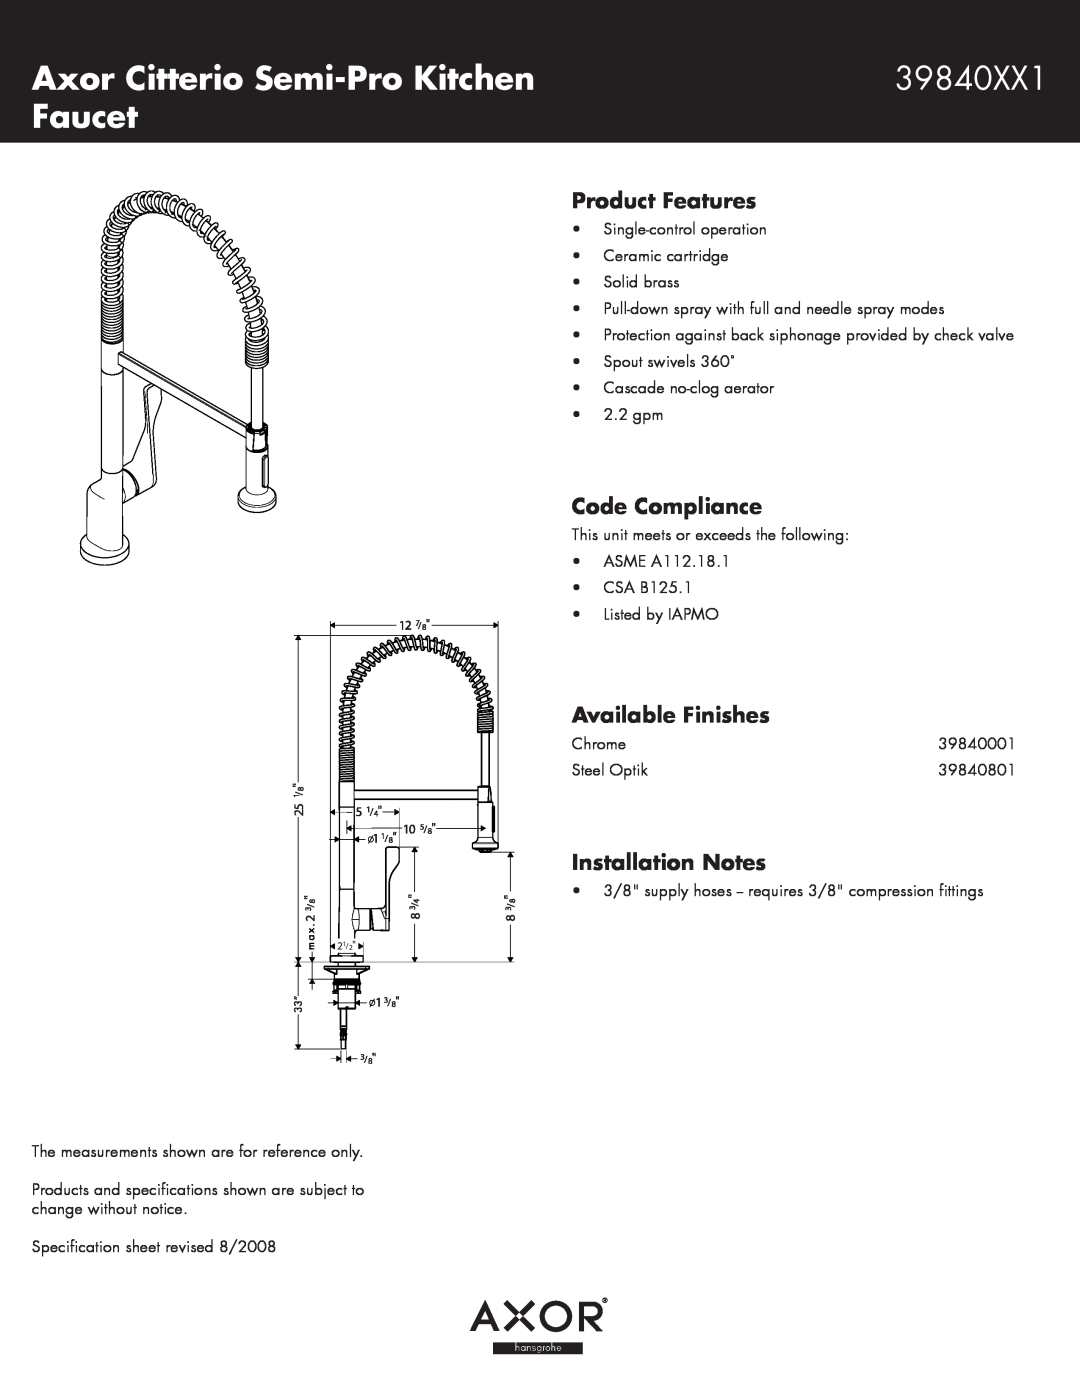 Axor 39840XX1 specifications Axor Citterio Semi-ProKitchen, Faucet, Product Features, Code Compliance, Available Finishes 